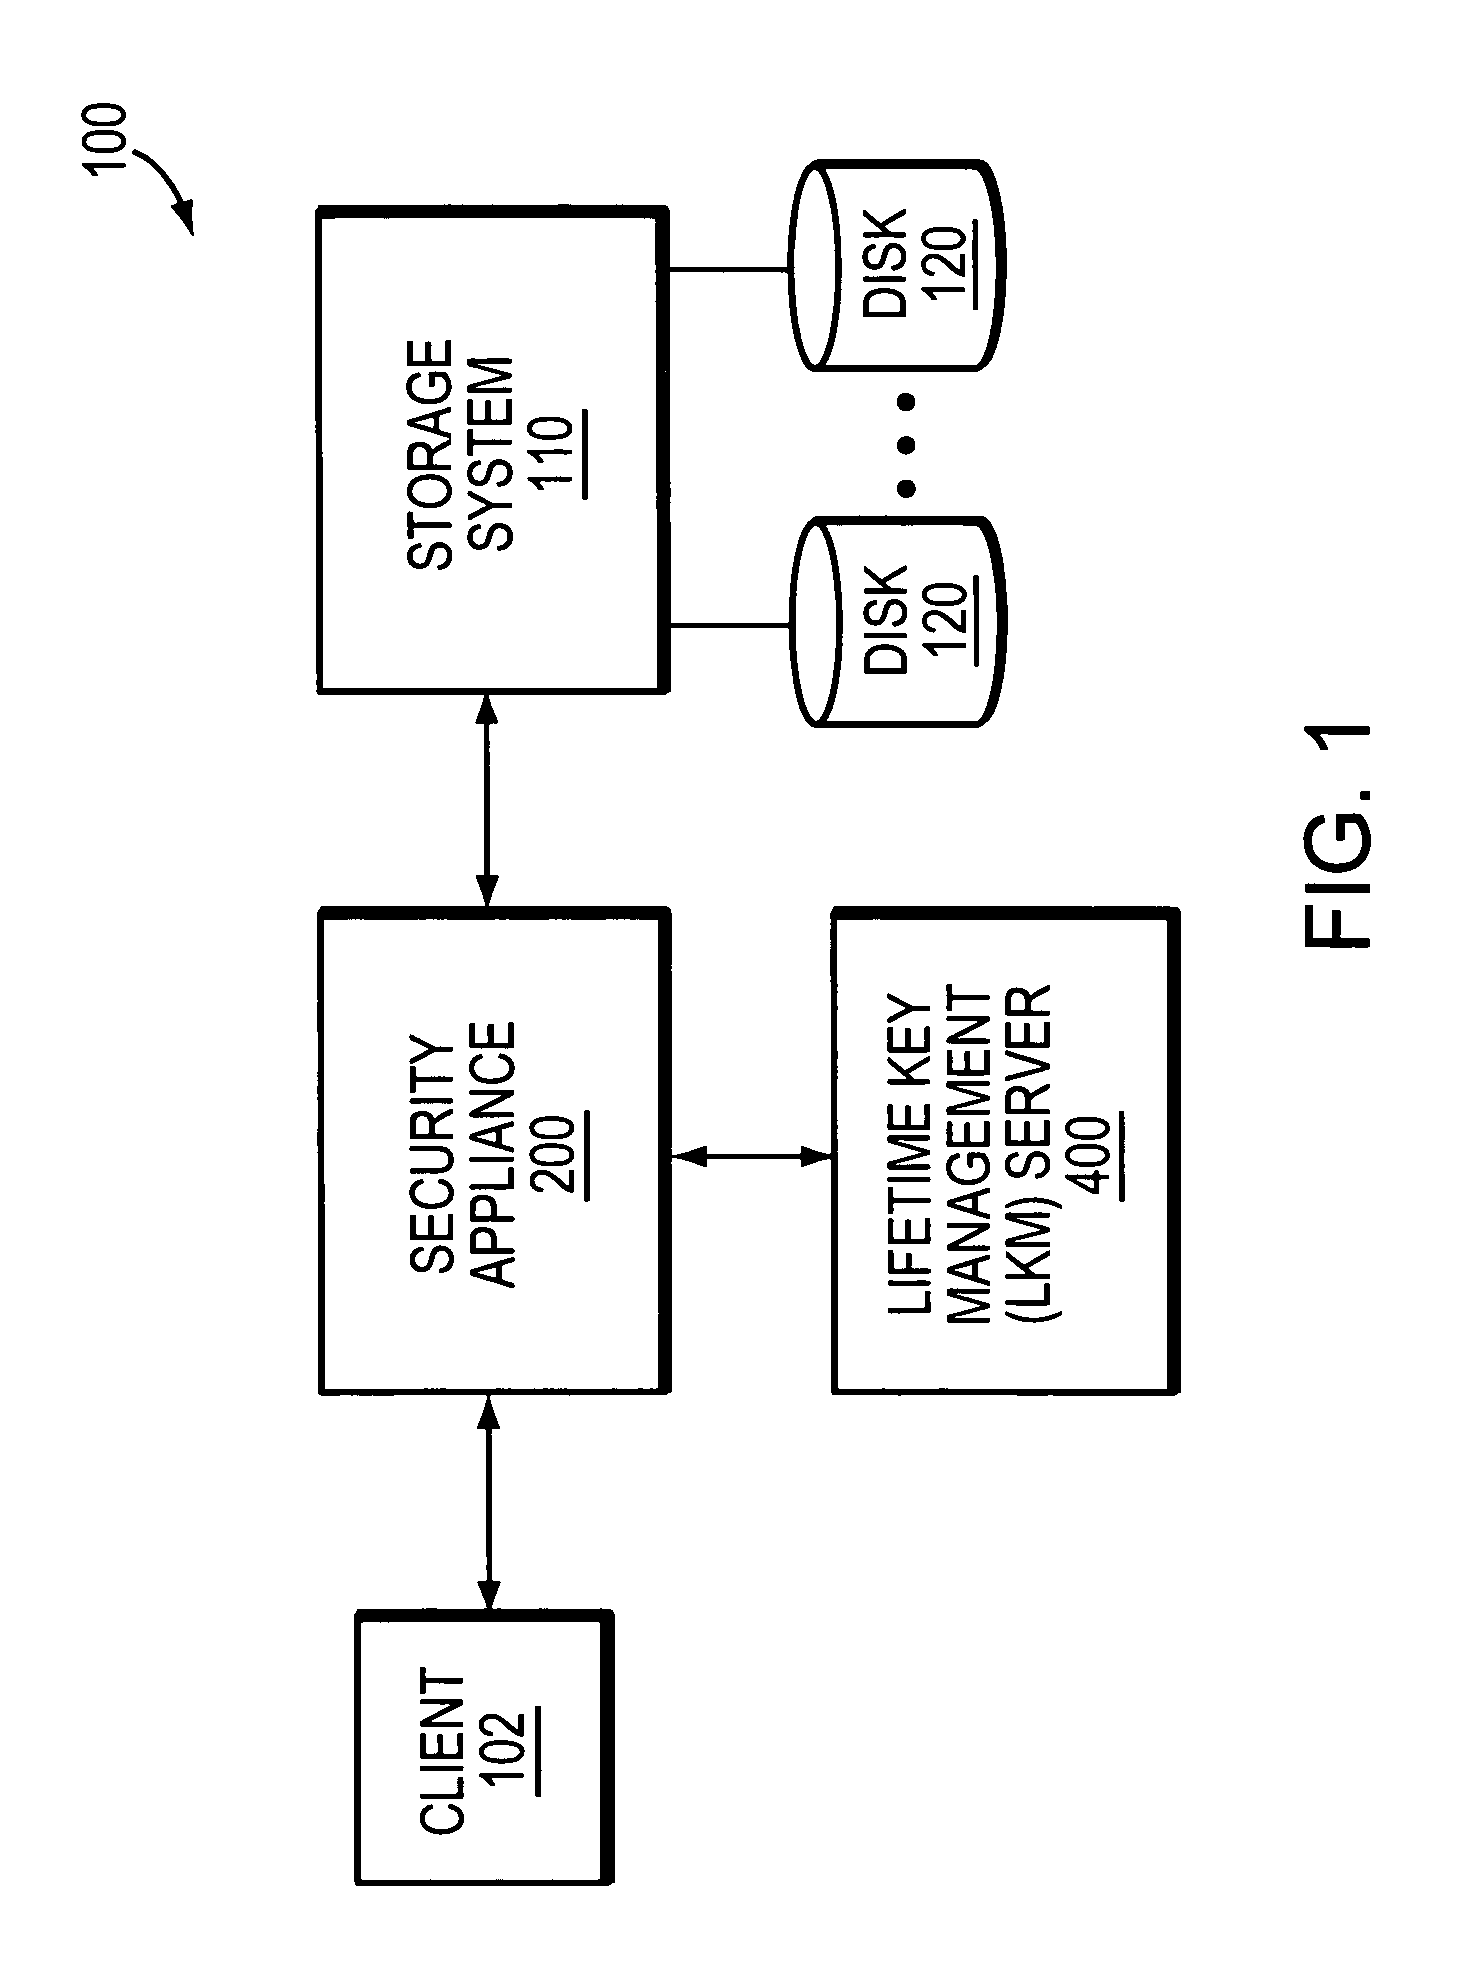 System and method for efficiently deleting a file from secure storage served by a storage system